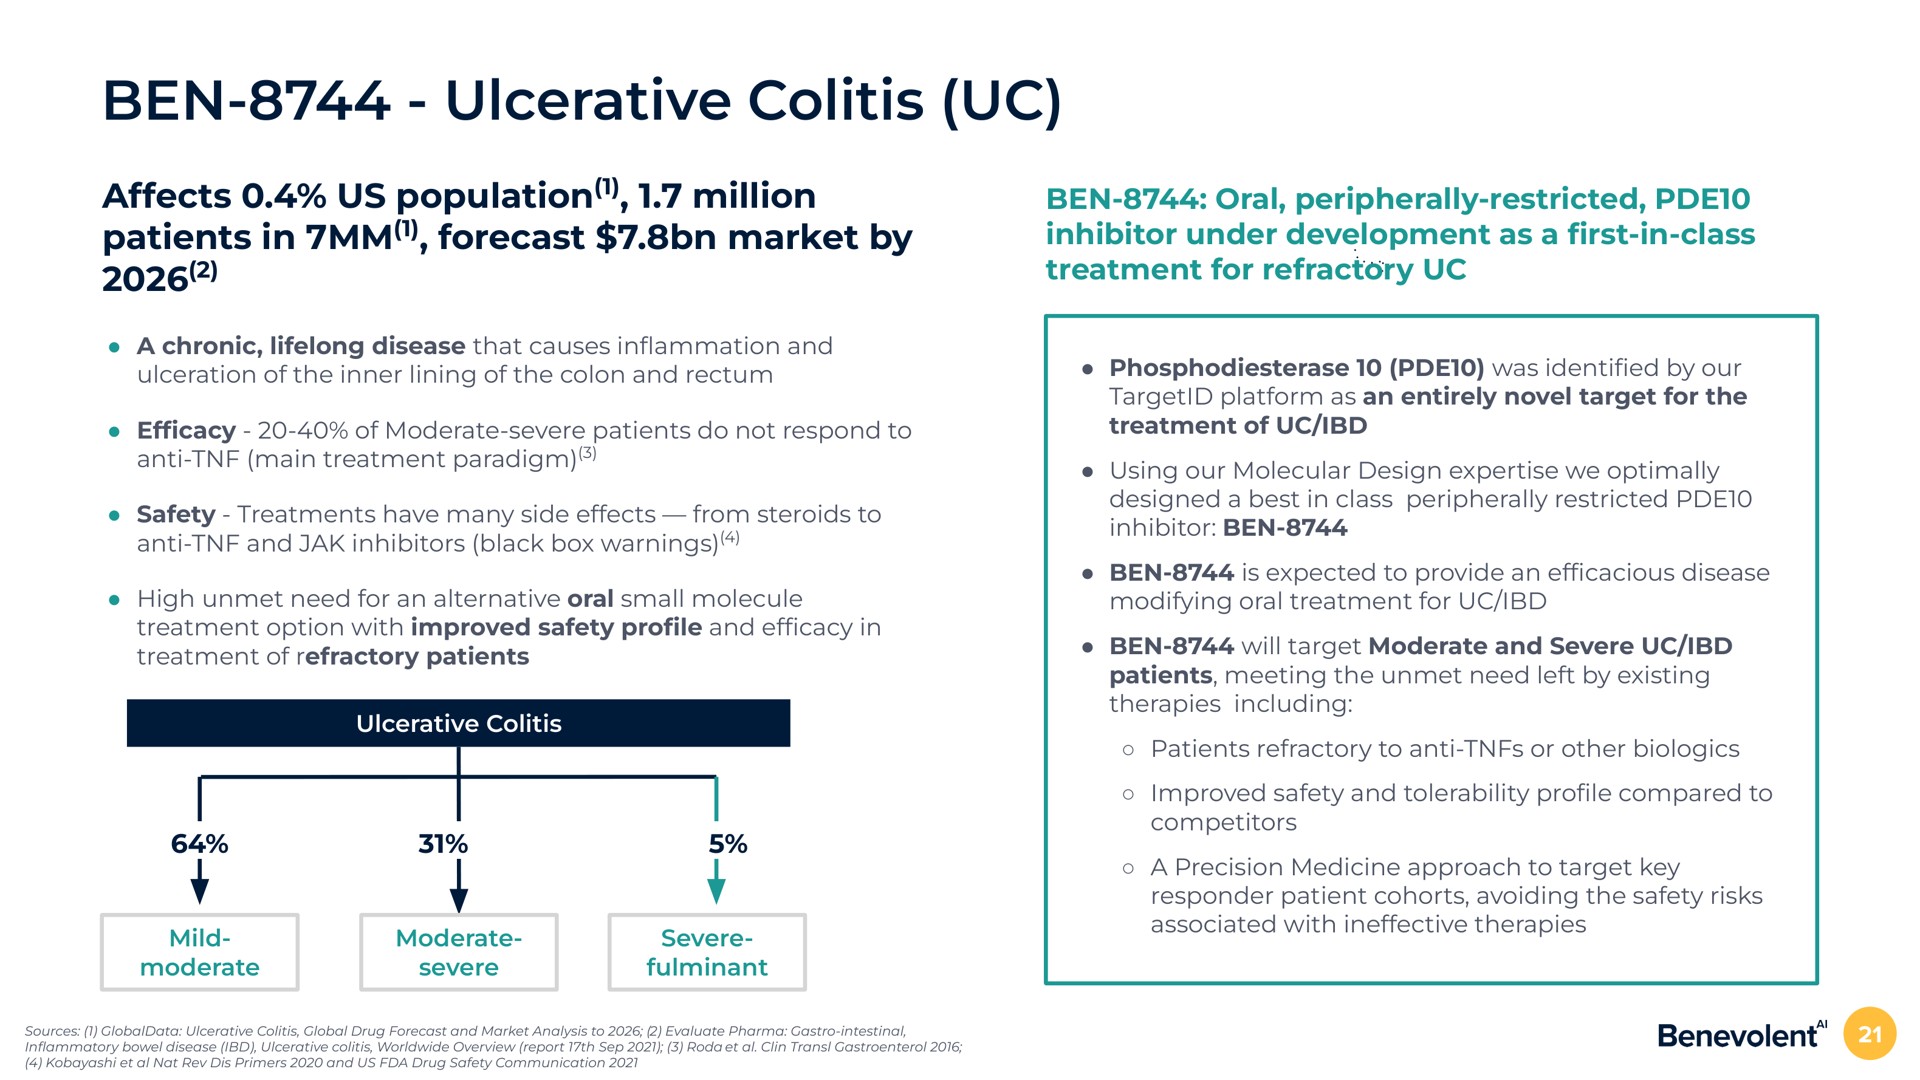 ben ulcerative colitis affects us population million patients in forecast market by ben oral peripherally restricted inhibitor under development as a in class treatment for refractory | BenevolentAI